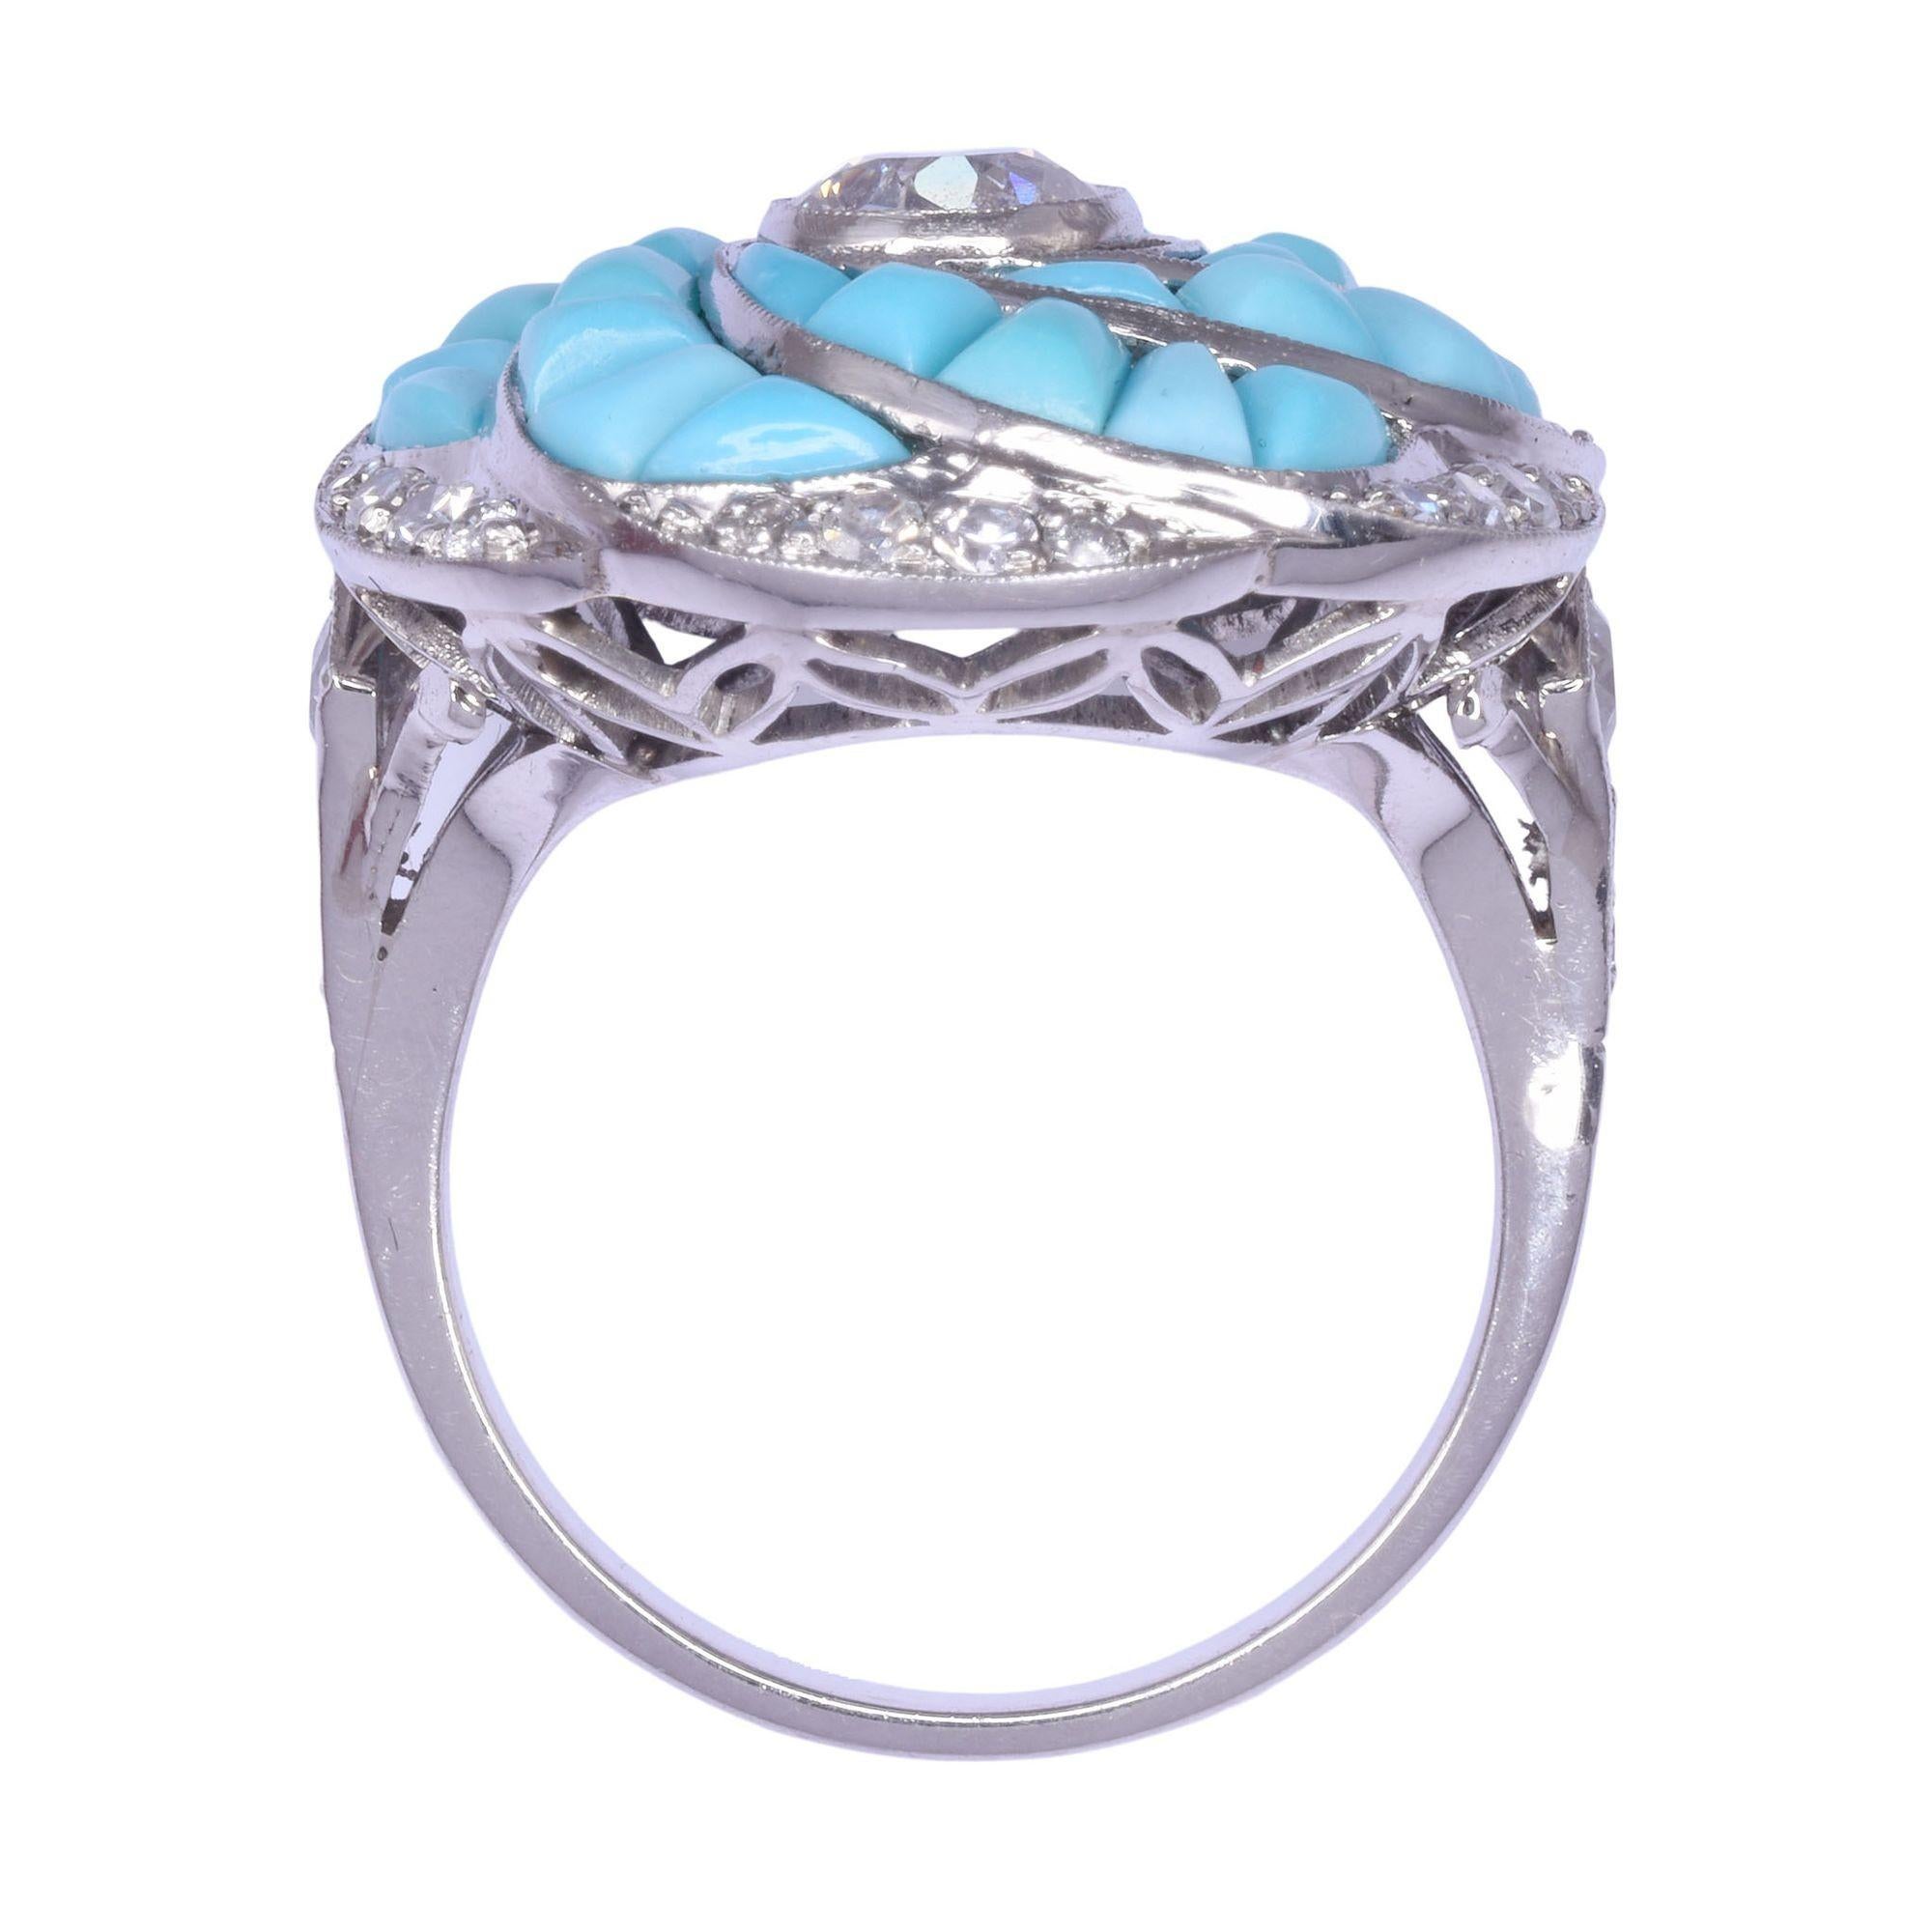 Custom Diamond & Turquoise Platinum Ring In Excellent Condition For Sale In Solvang, CA